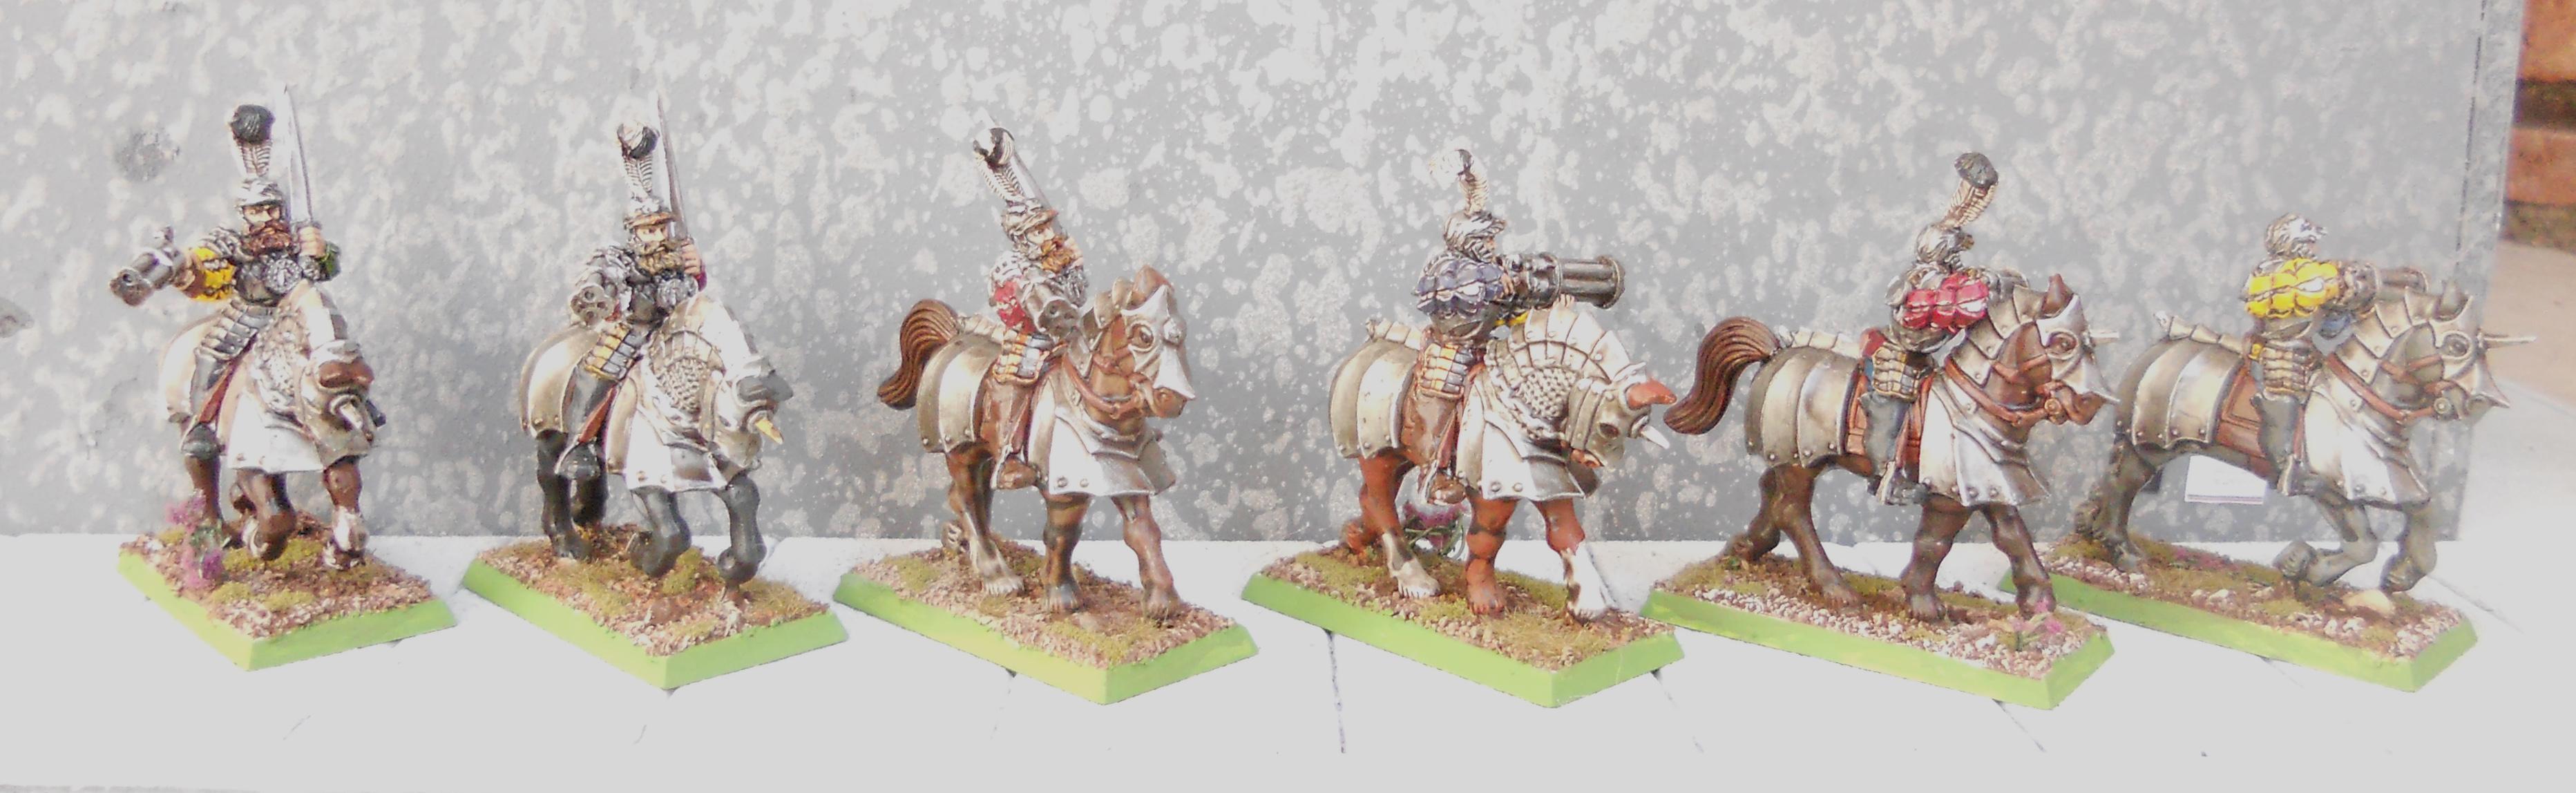 Oldhammer, Outriders